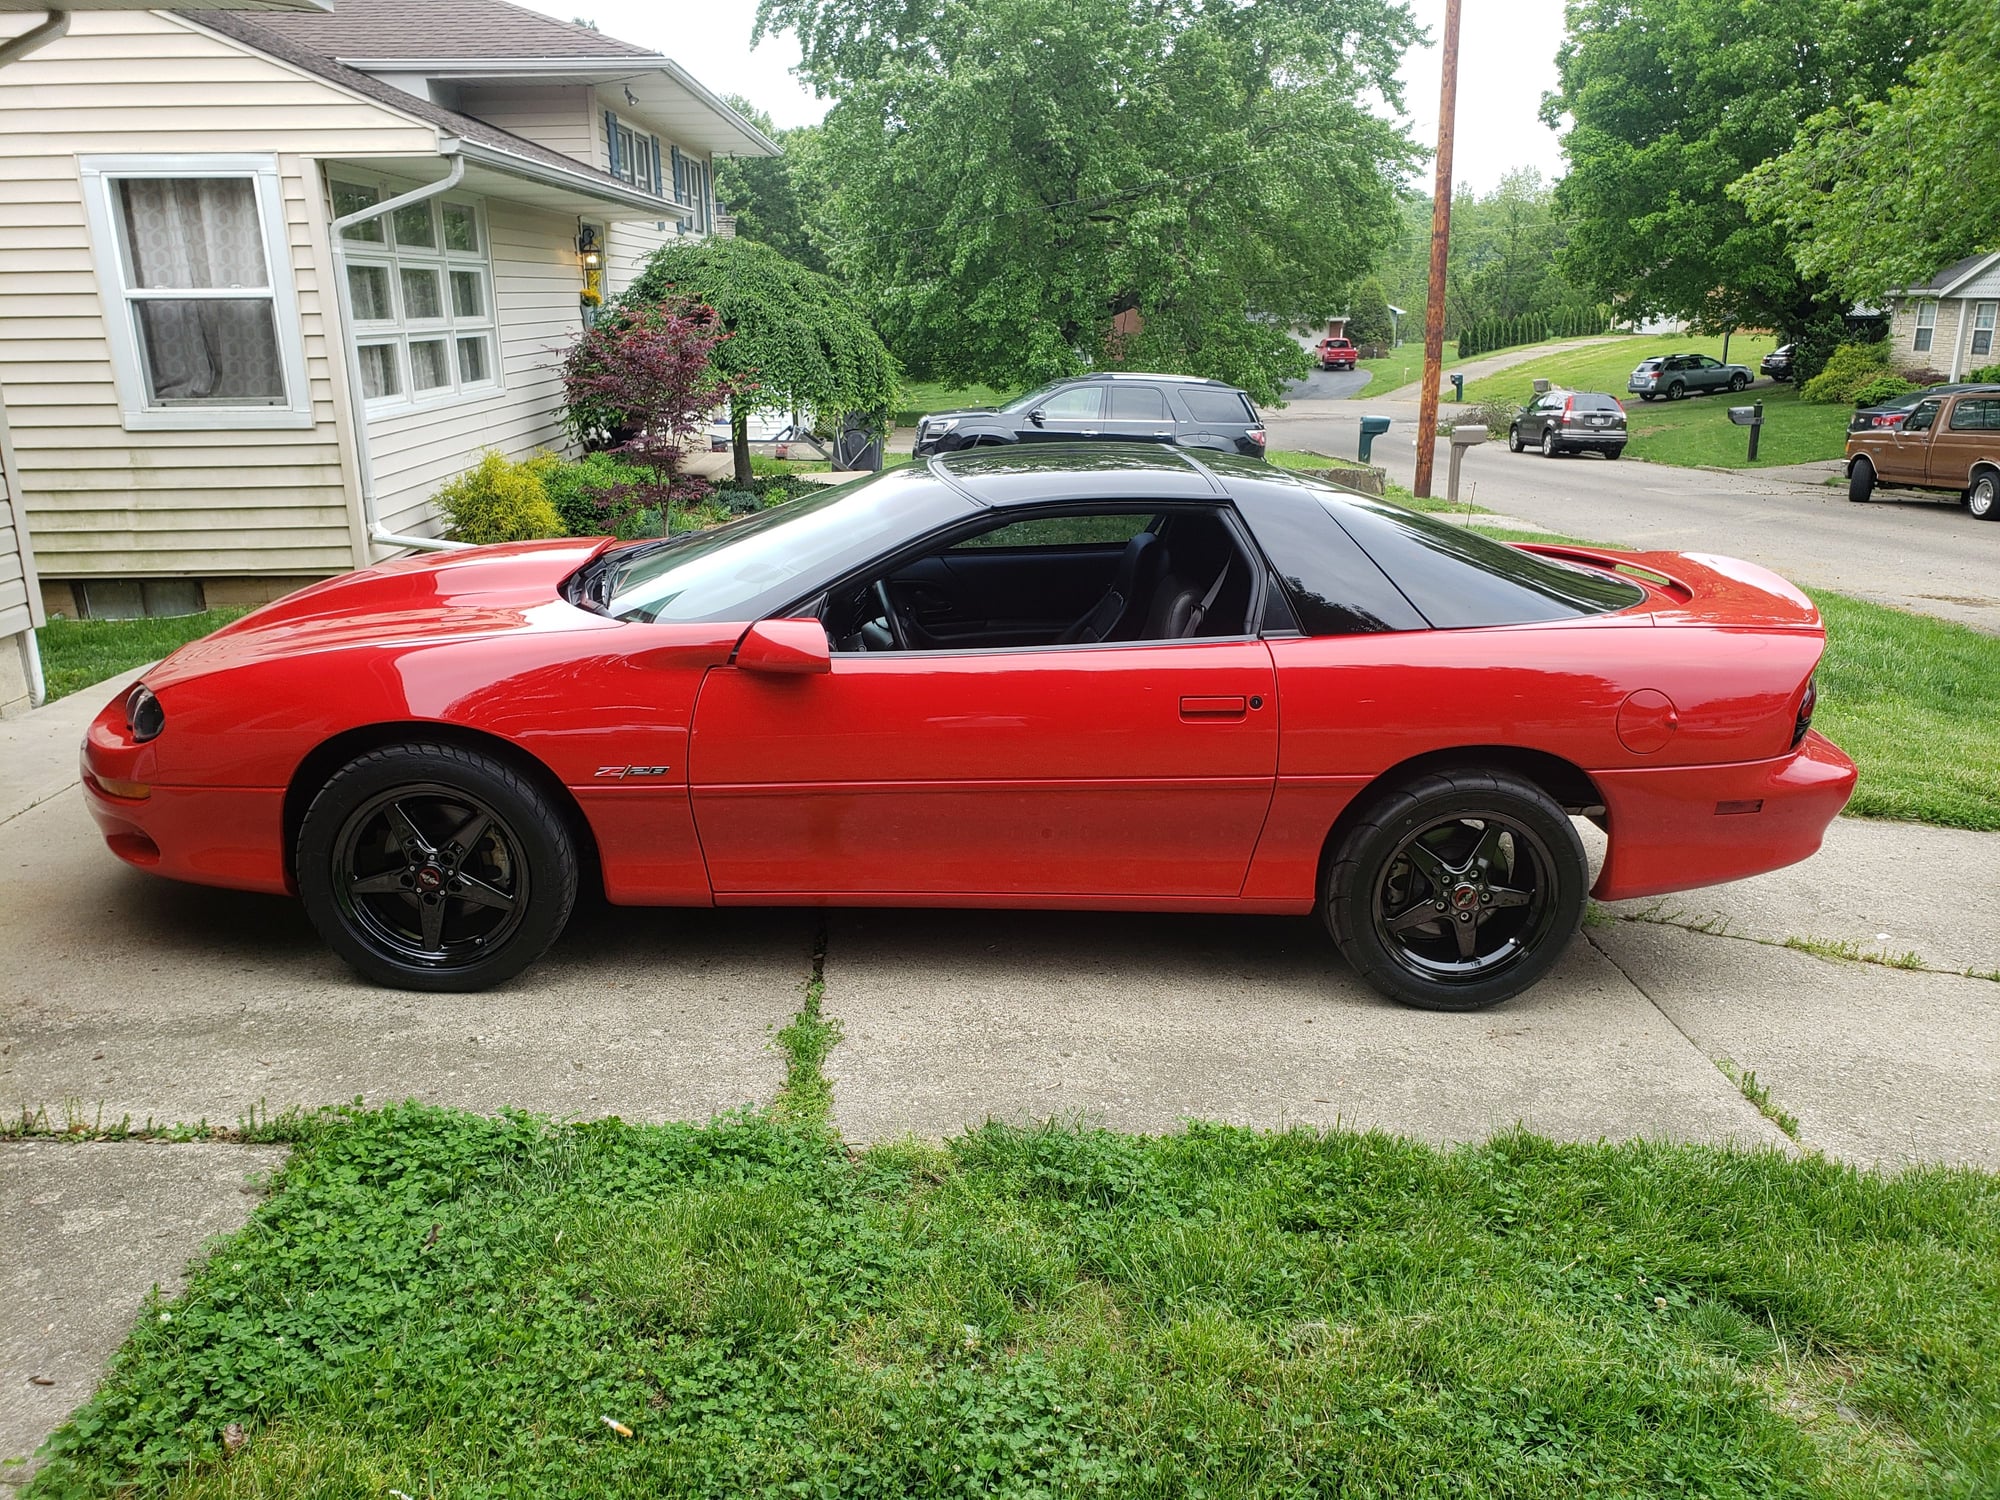 2001 Chevrolet Camaro - LS3 swapped 2001 Camaro Z28 - Used - VIN 2g1fp22g812147980 - 21,454 Miles - 8 cyl - 2WD - Automatic - Coupe - Red - Jackson, OH 45640, United States